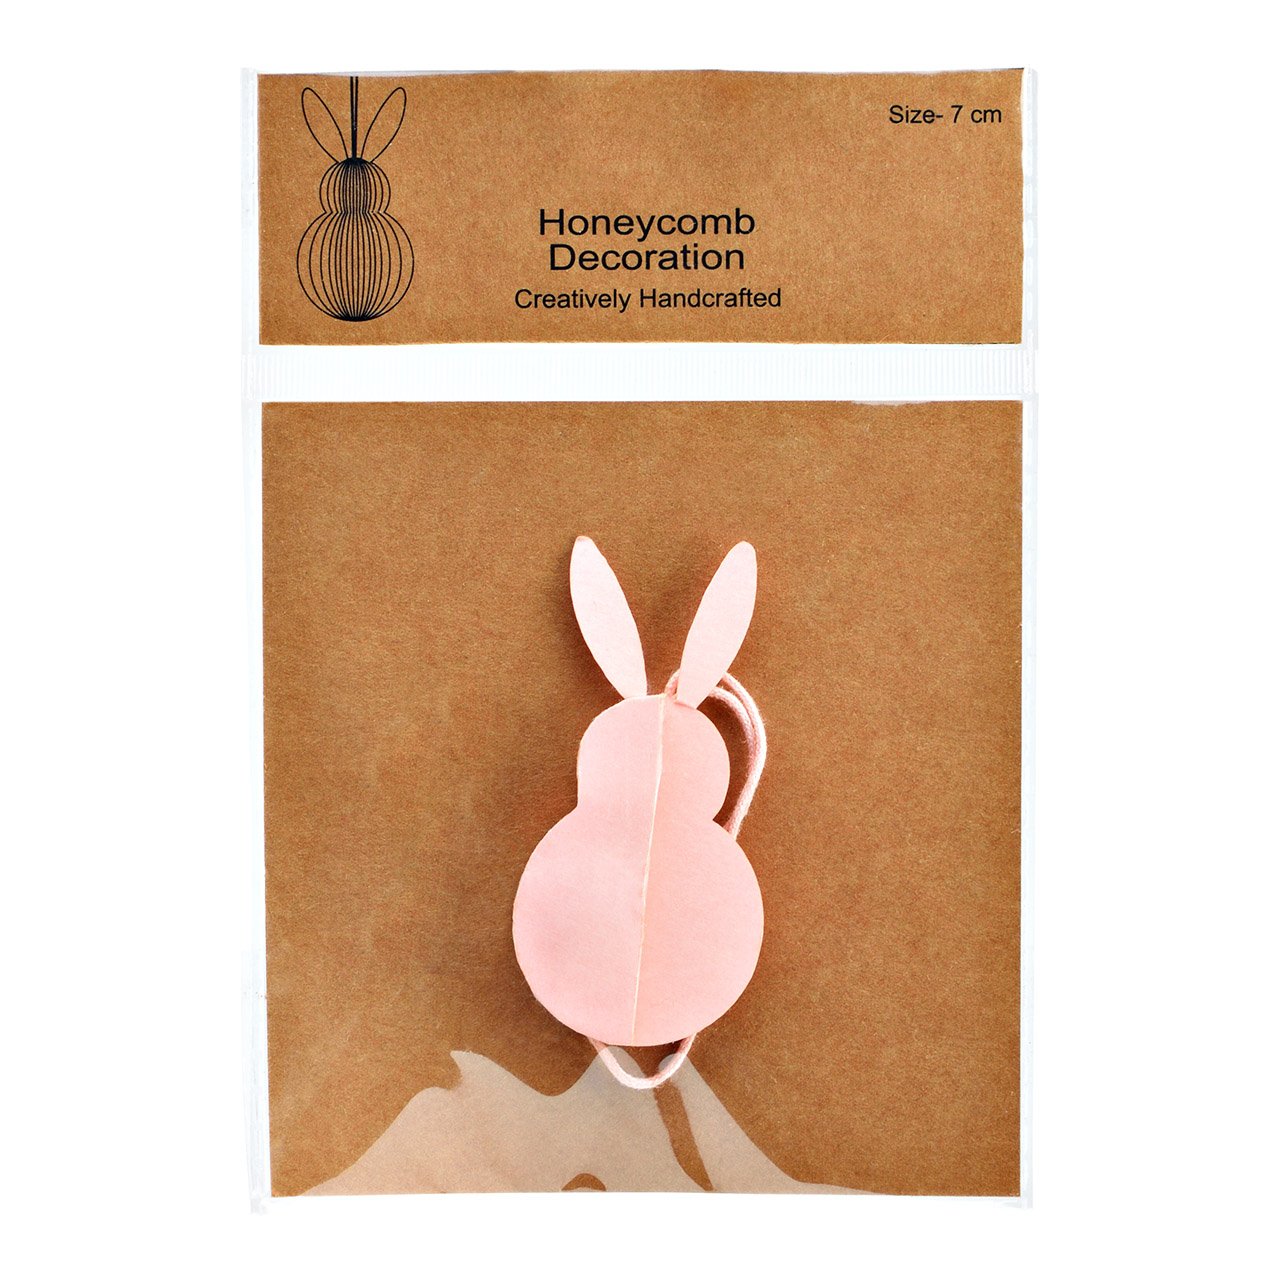 Hanger Honeycomb bunny made of paper/cardboard pink (W/H/D) 6x10x6cm